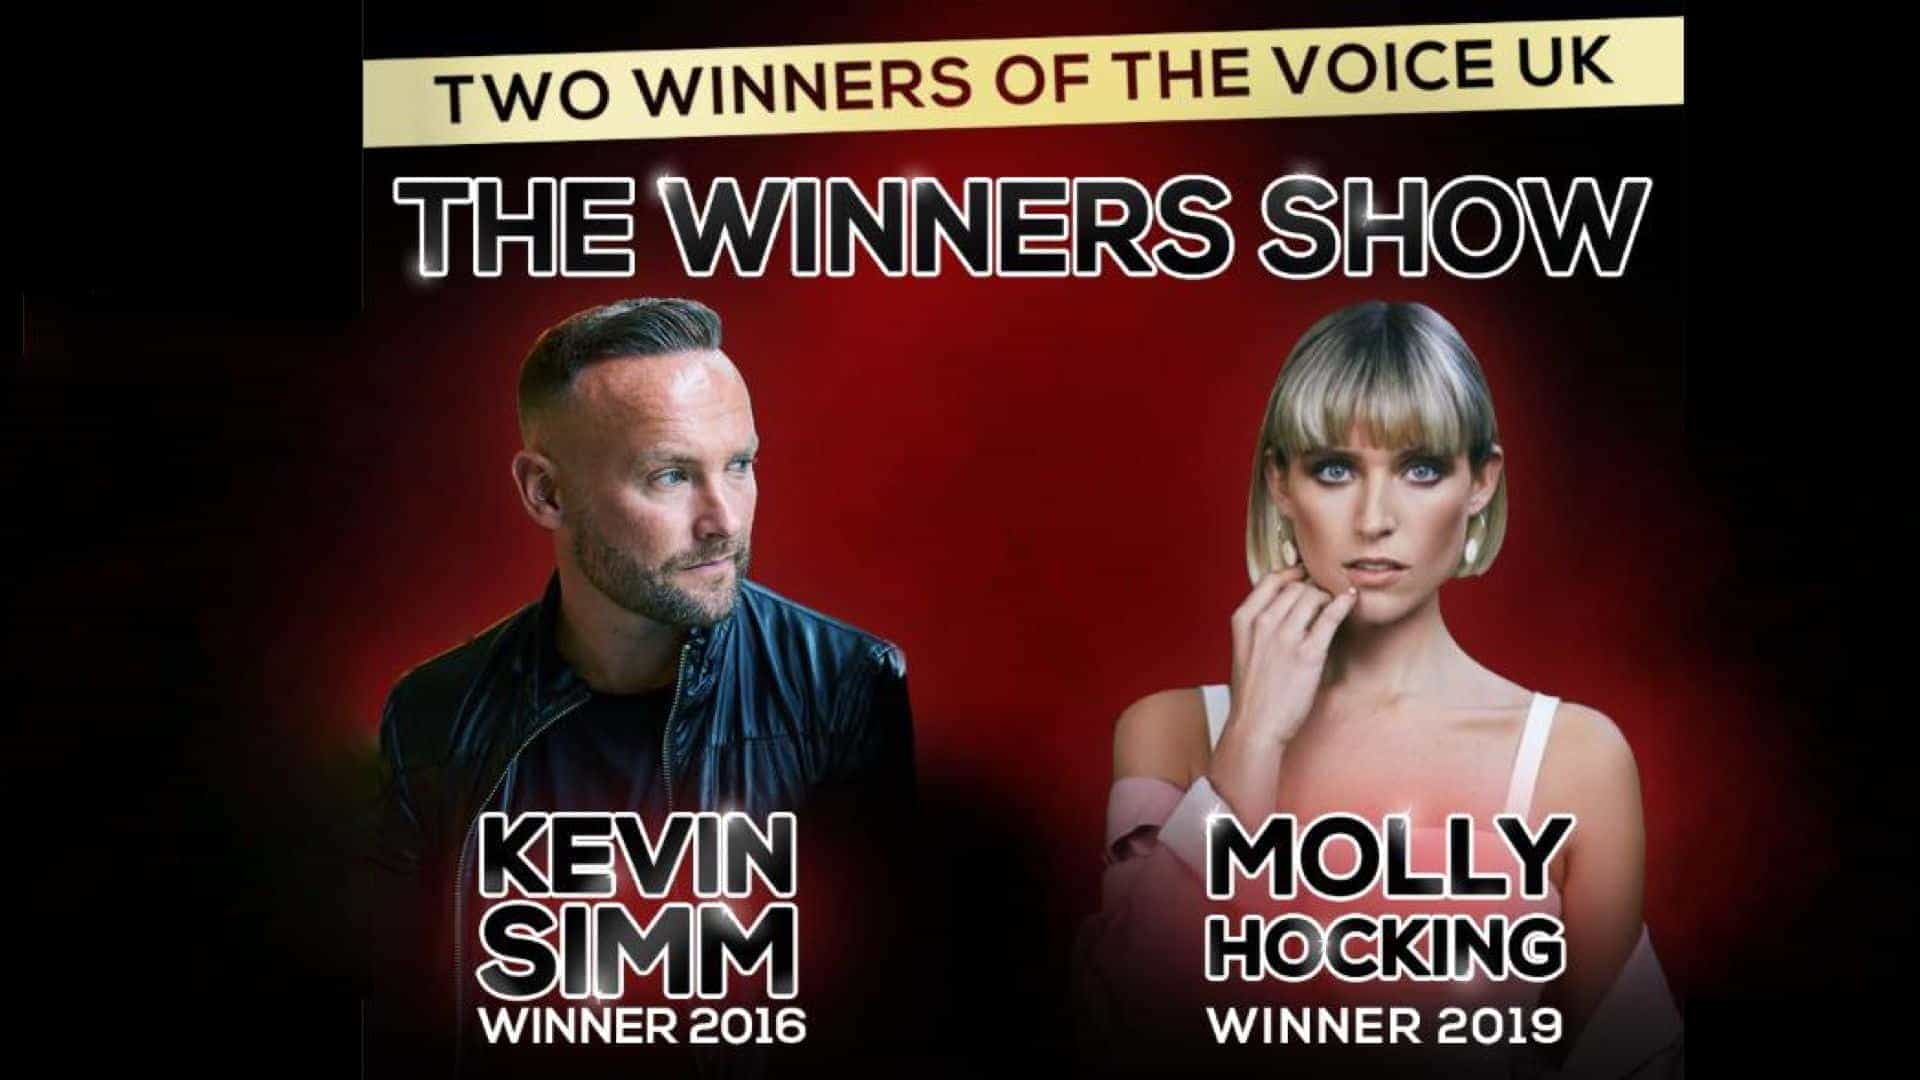 The Winners Show - Kevin Simm + Molly Hocking